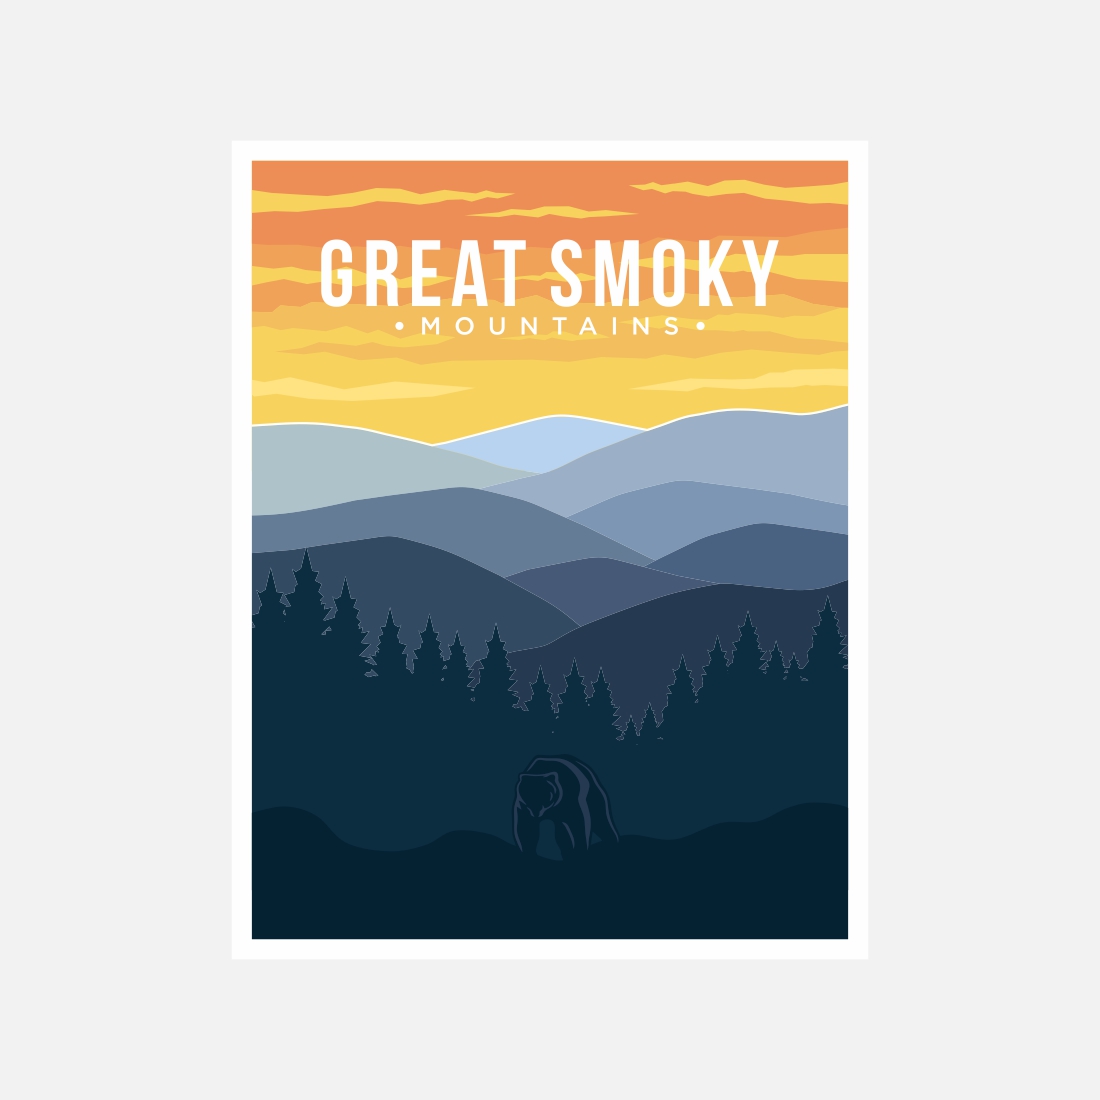 Great Smoky national park poster vector illustration design – Only $8 preview image.